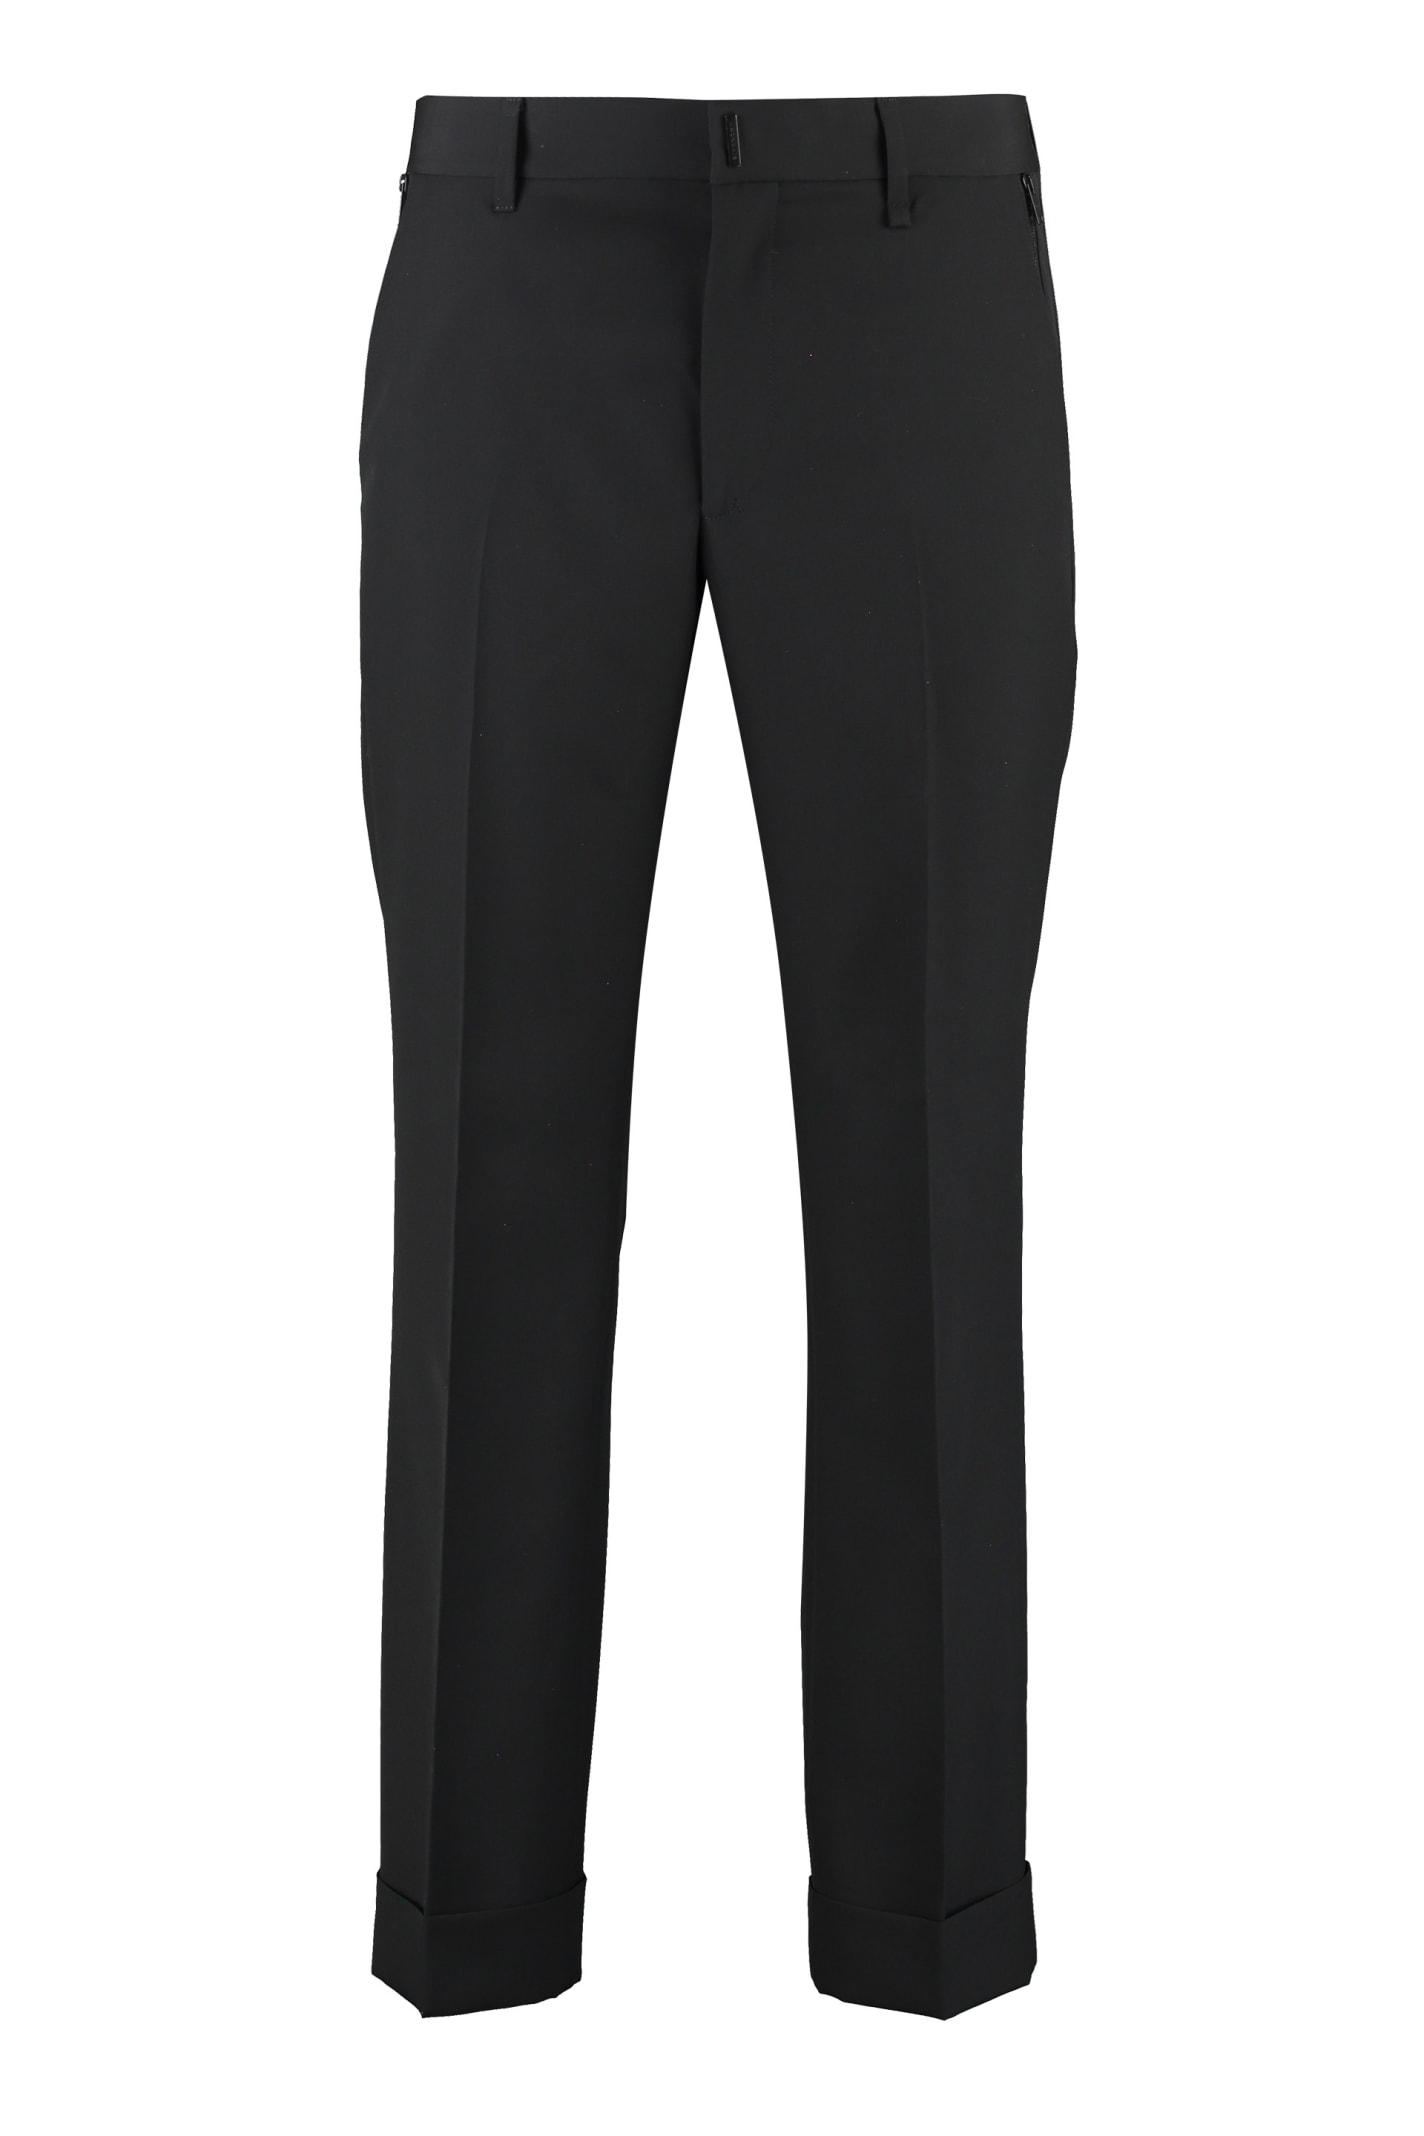 Givenchy Slim Wool Trousers